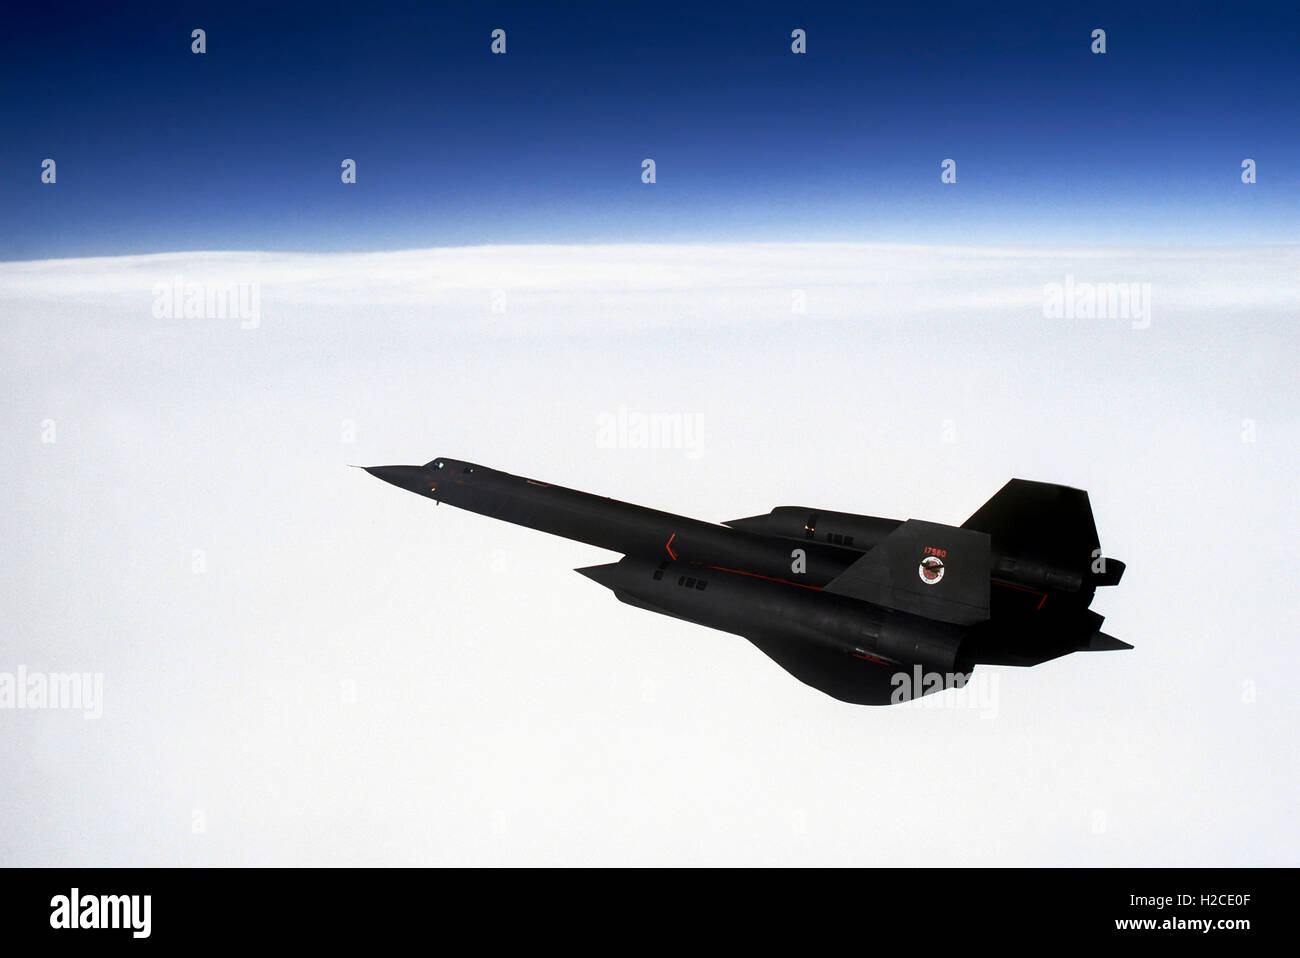 A US Air Force SR-71 Blackbird long-range strategic reconnaissance aircraft flying at high altitude during a mission out of Beale Air Force Base. The Blackbird can travel at 2,100 mph at 80,000 feet and is capable of surveying 100,000 square miles of Earth’s surface per hour. Stock Photo